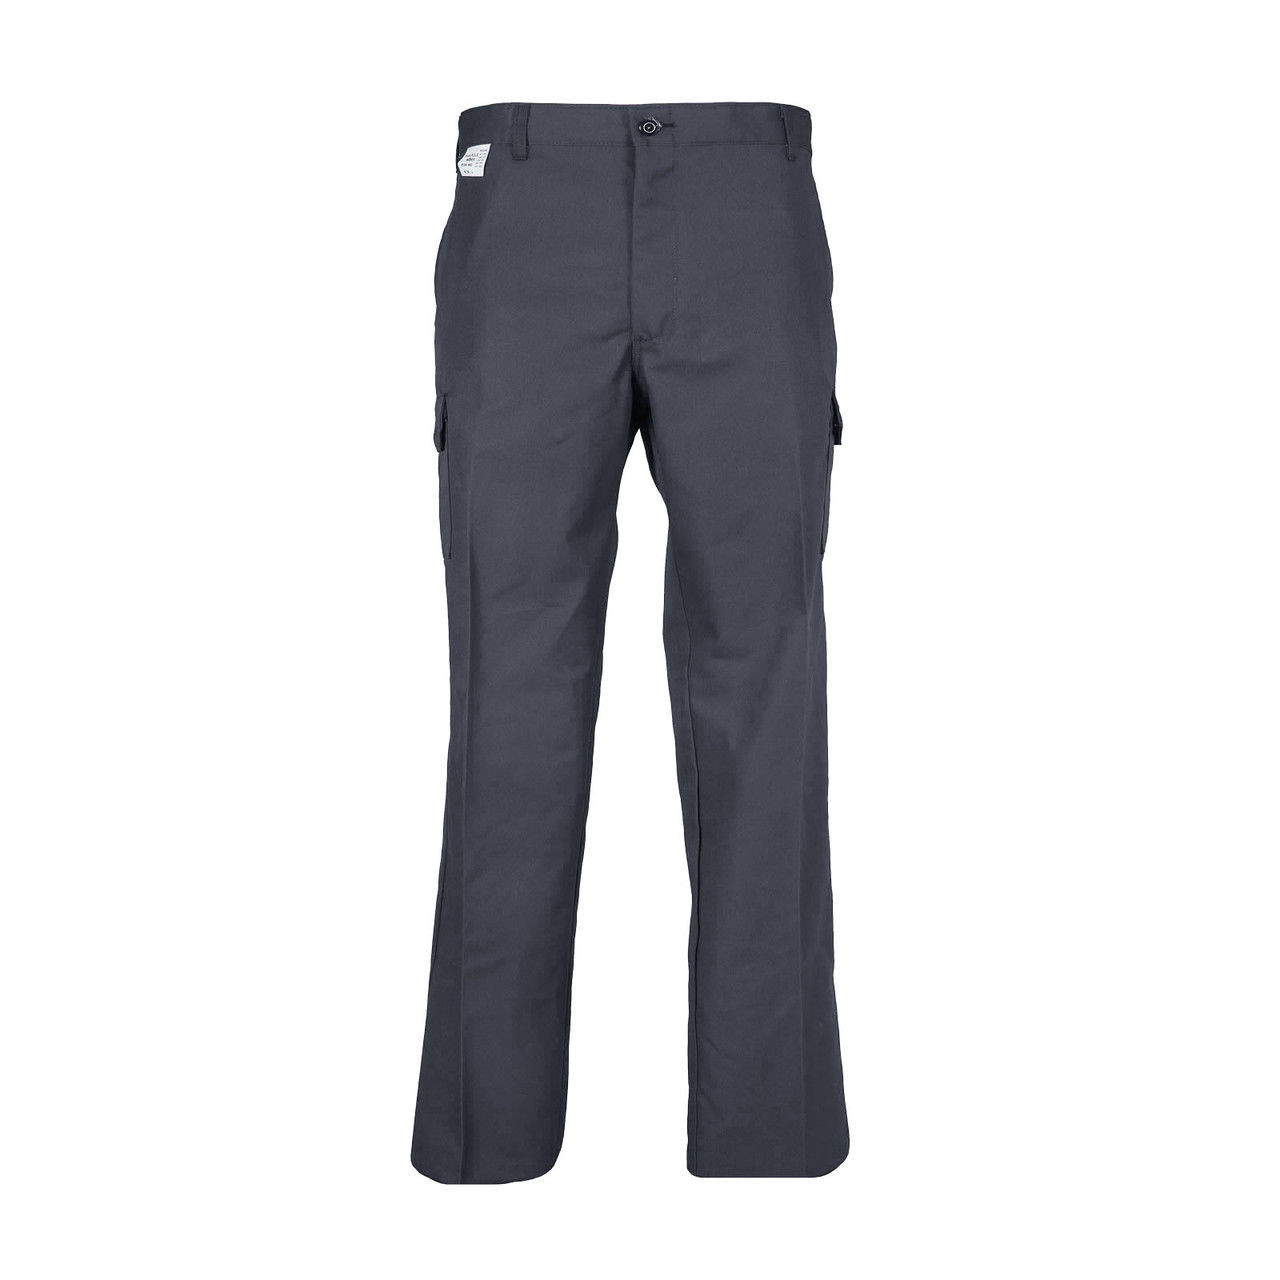 High Quality Cargo Hiking Trousers For Men 6 Pockets, Elastic, Perfect For  Work, Combat, And Outdoor Activities Style 2378 From Zlzol, $28.34 |  DHgate.Com